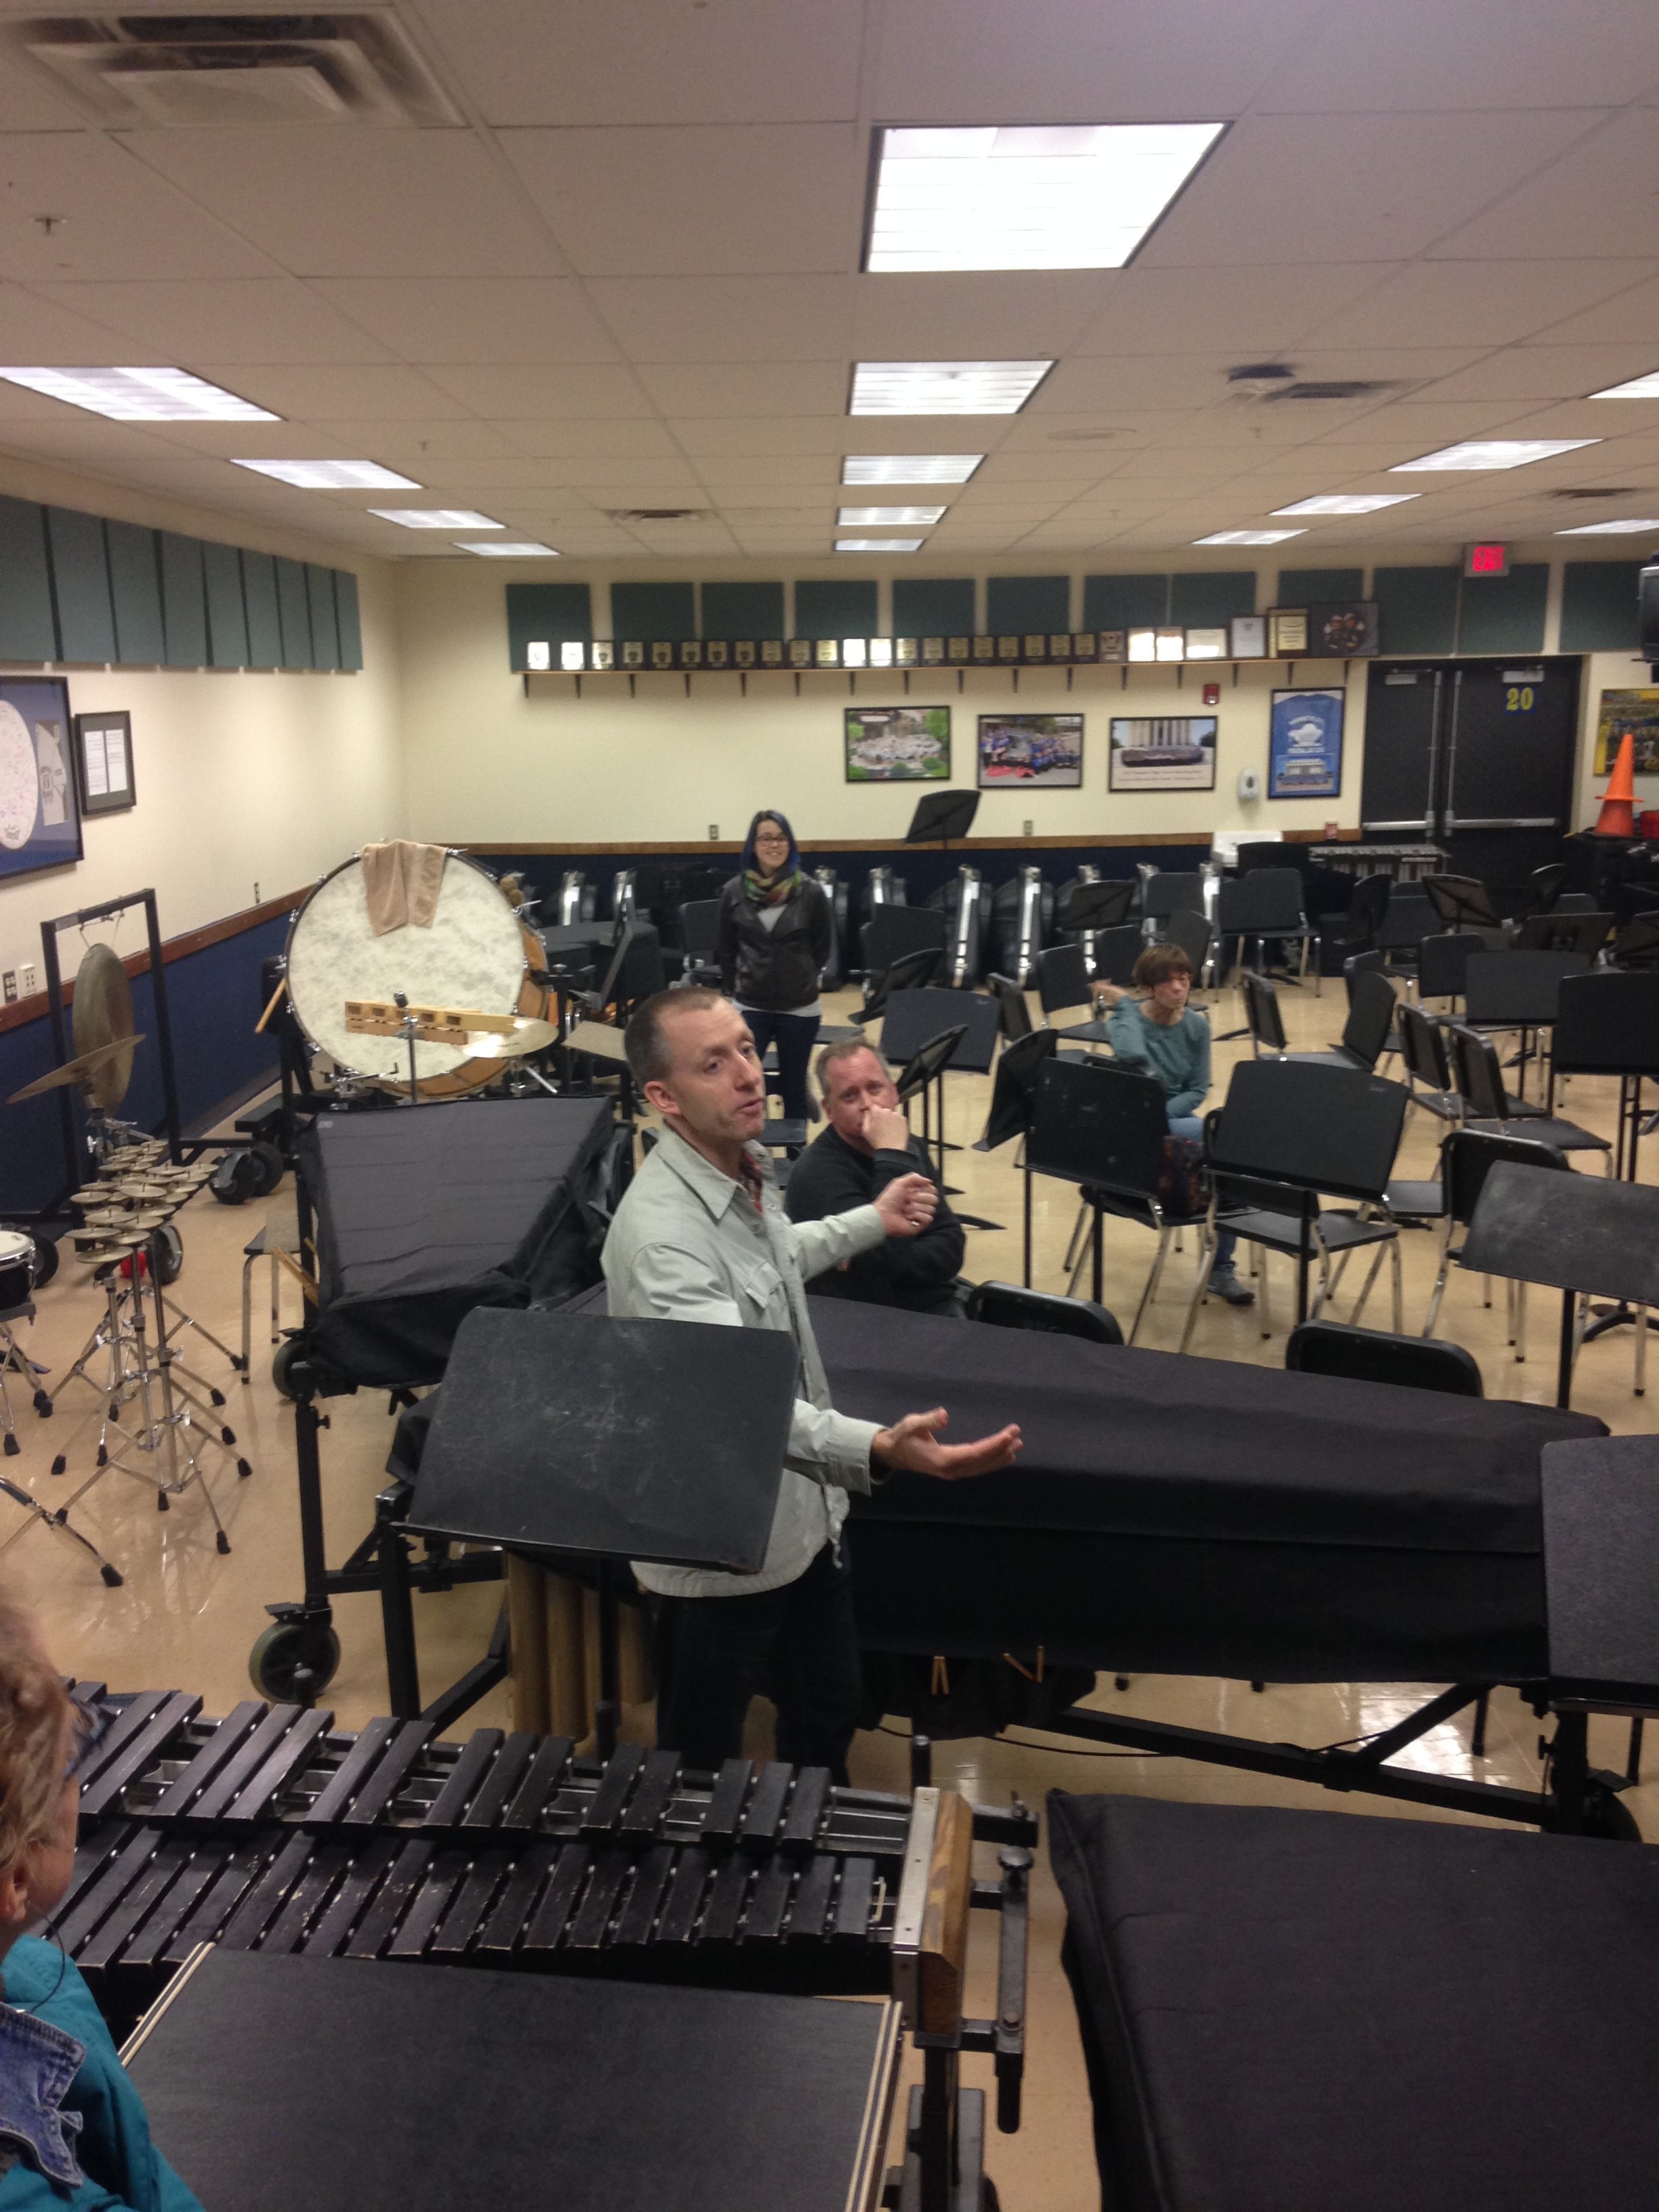 A band instructor discusses Hampton Township's band program in a large band room full of music stands and instruments.